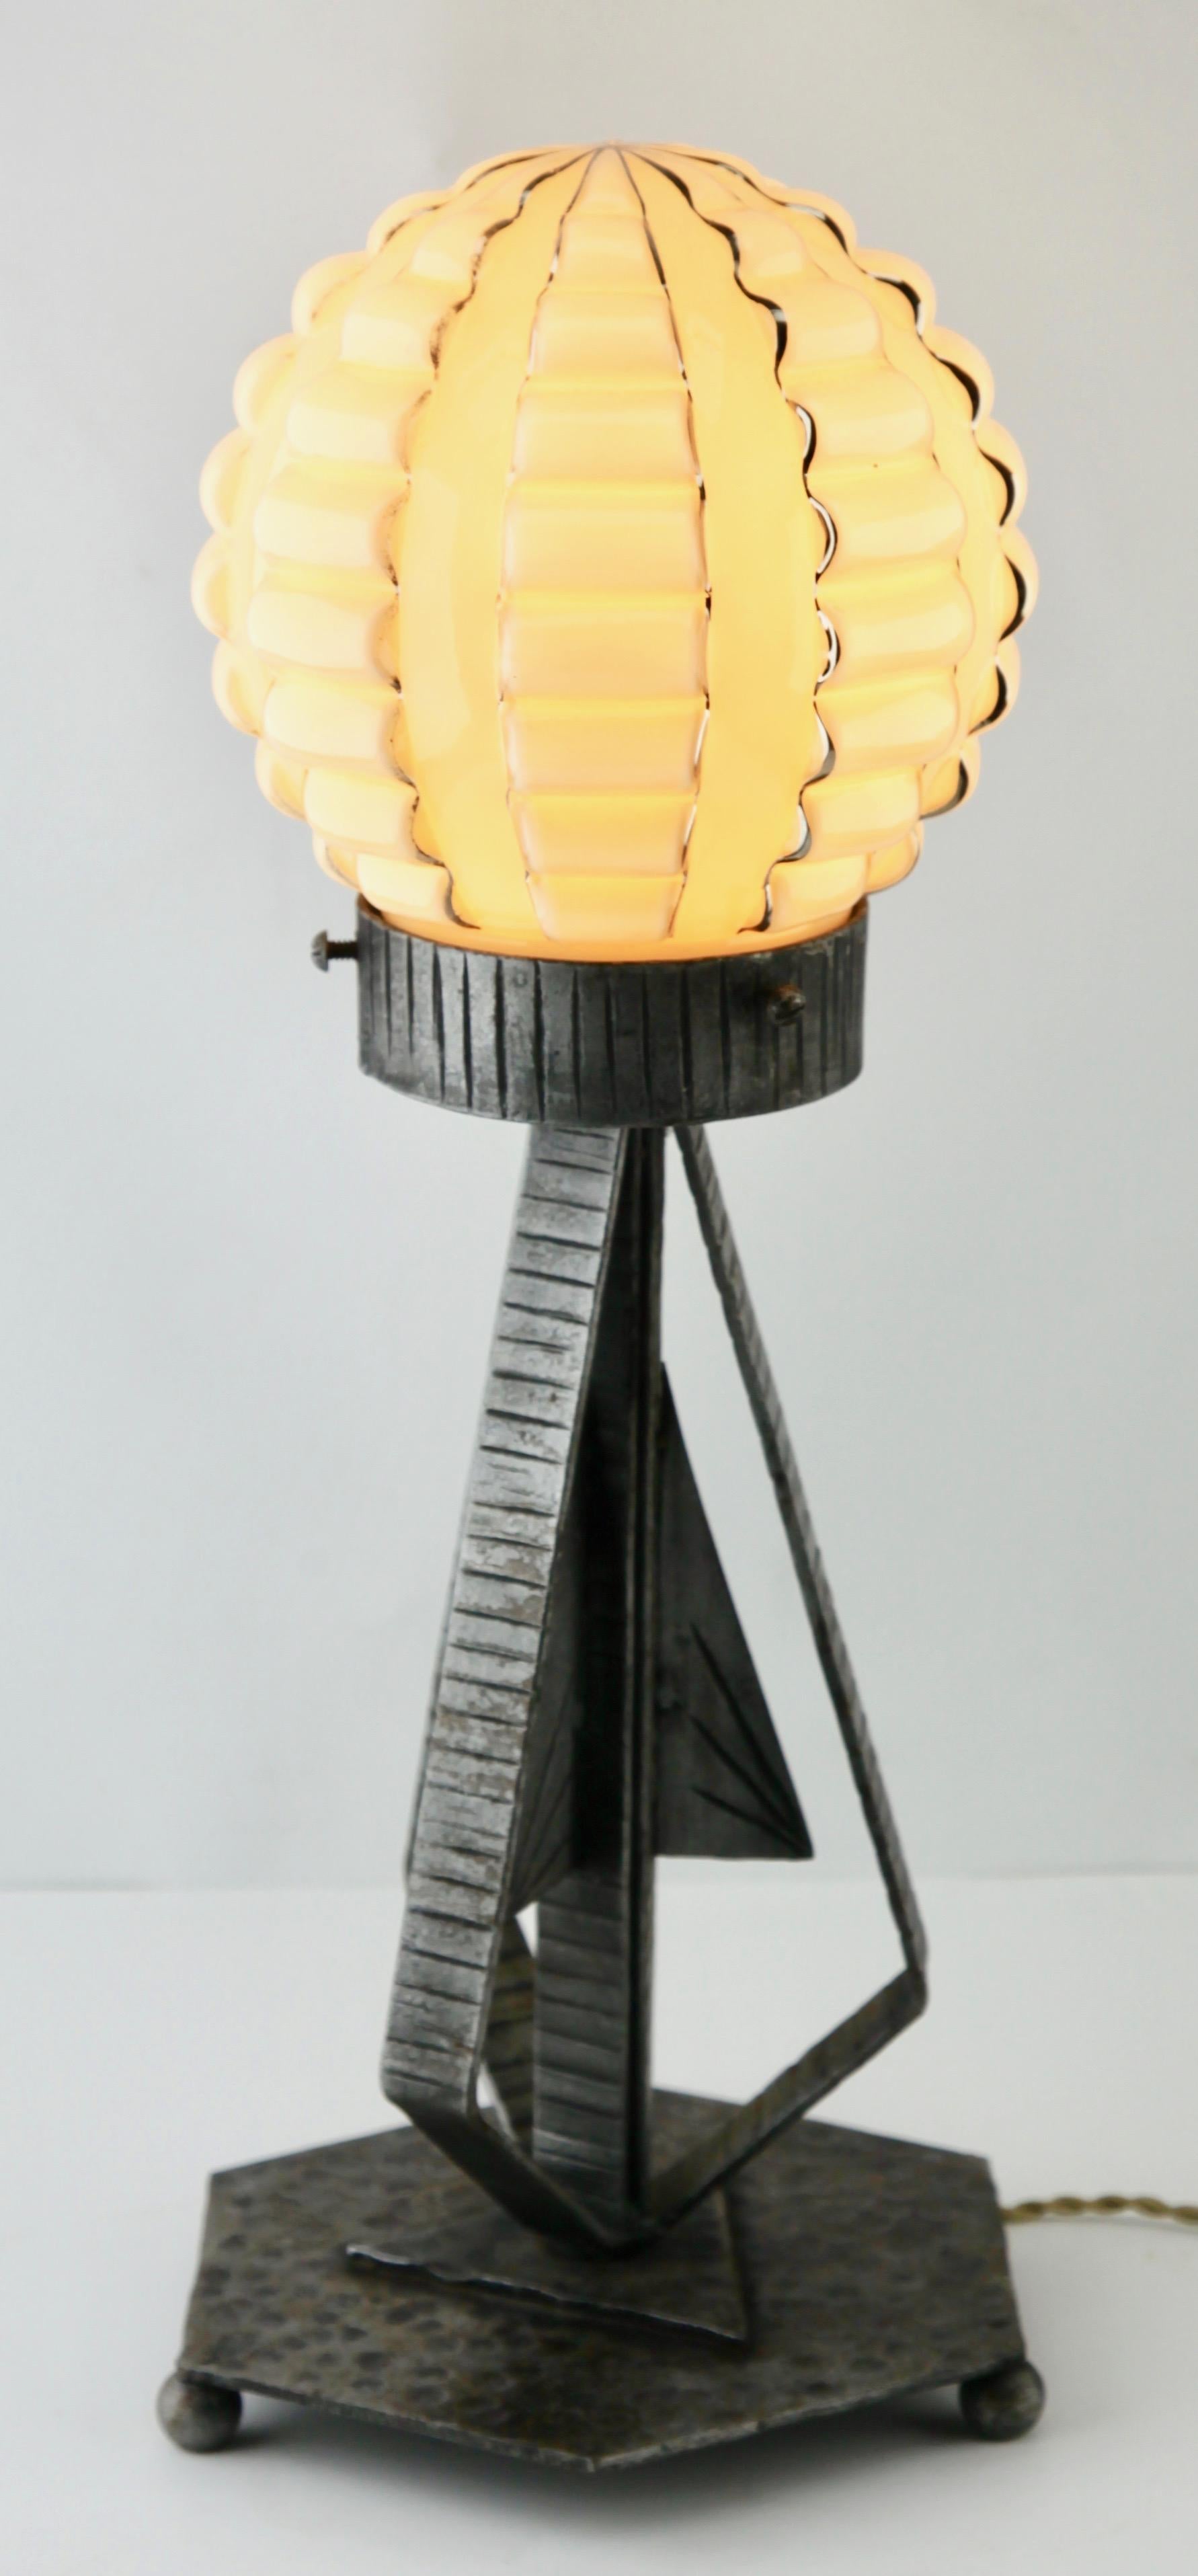 Hand-Crafted French Art Deco Lamp in Wrought Iron with Glass Shade with Golden Highlights